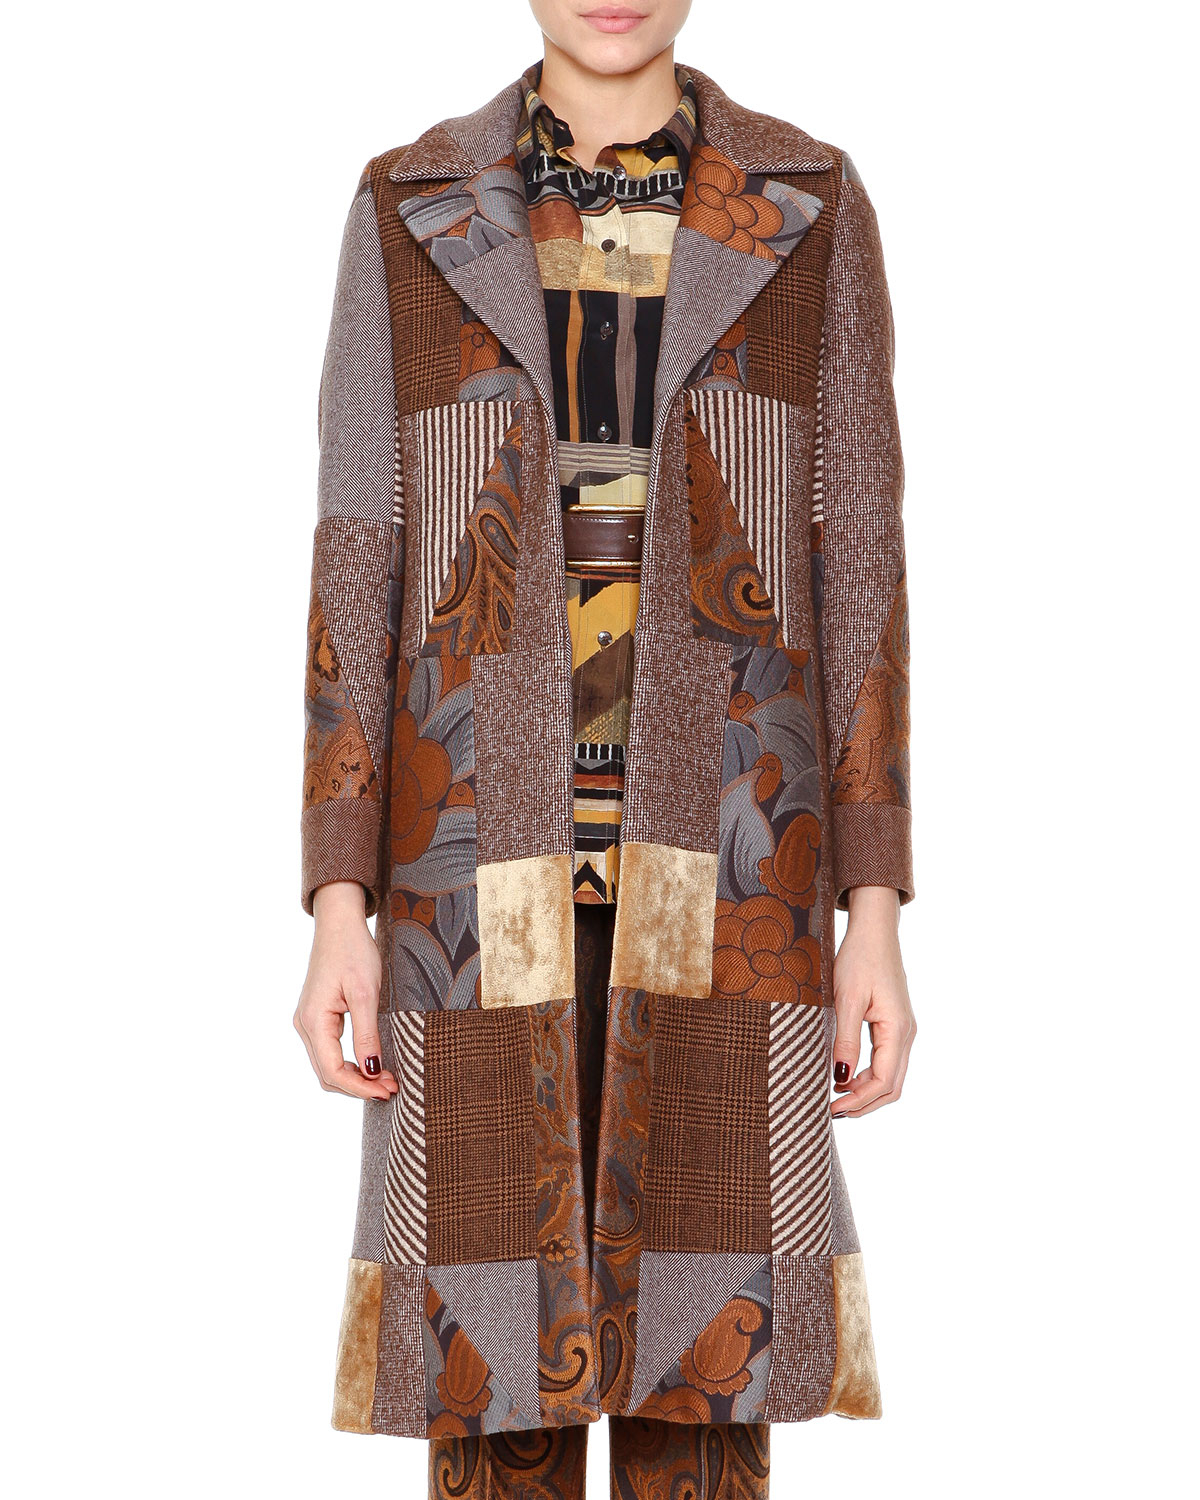 Etro Patchwork Jacquard Fitted Coat in Brown | Lyst